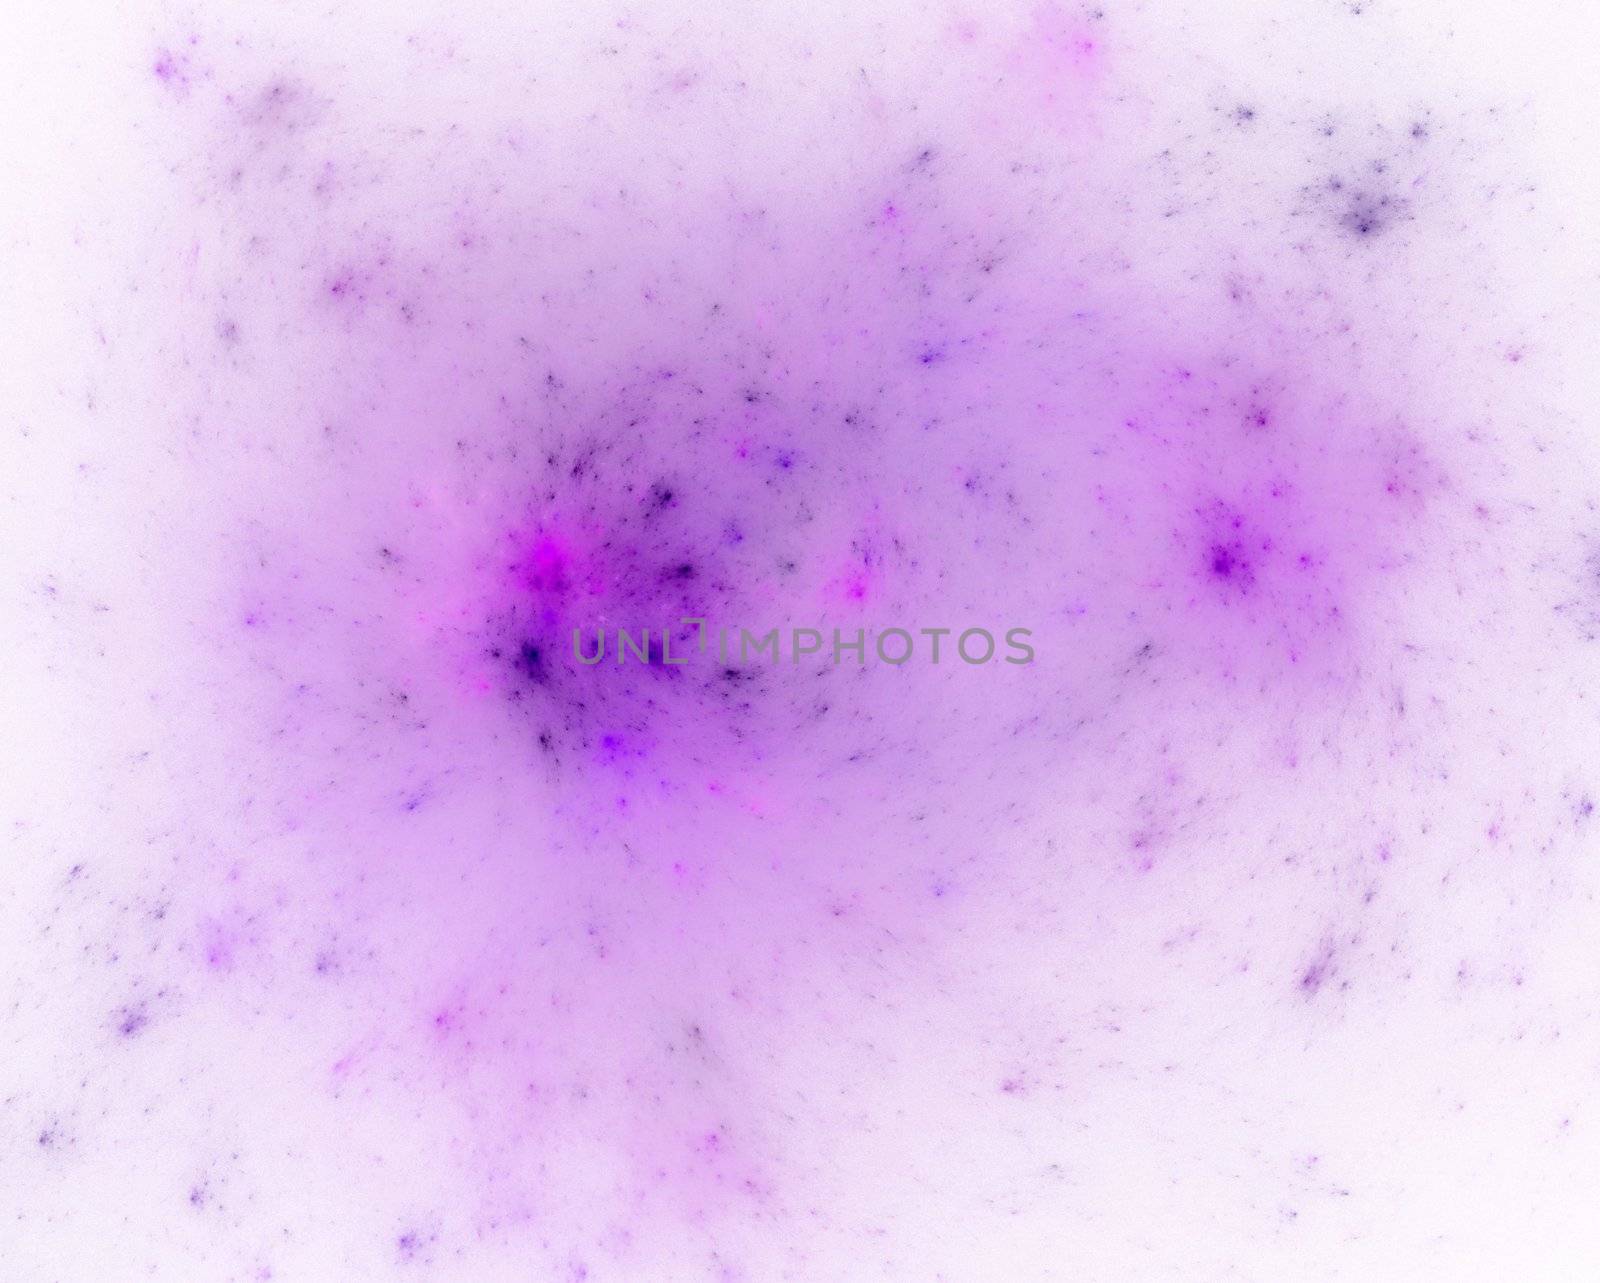 Abstract illustration of blue clusters on a white background